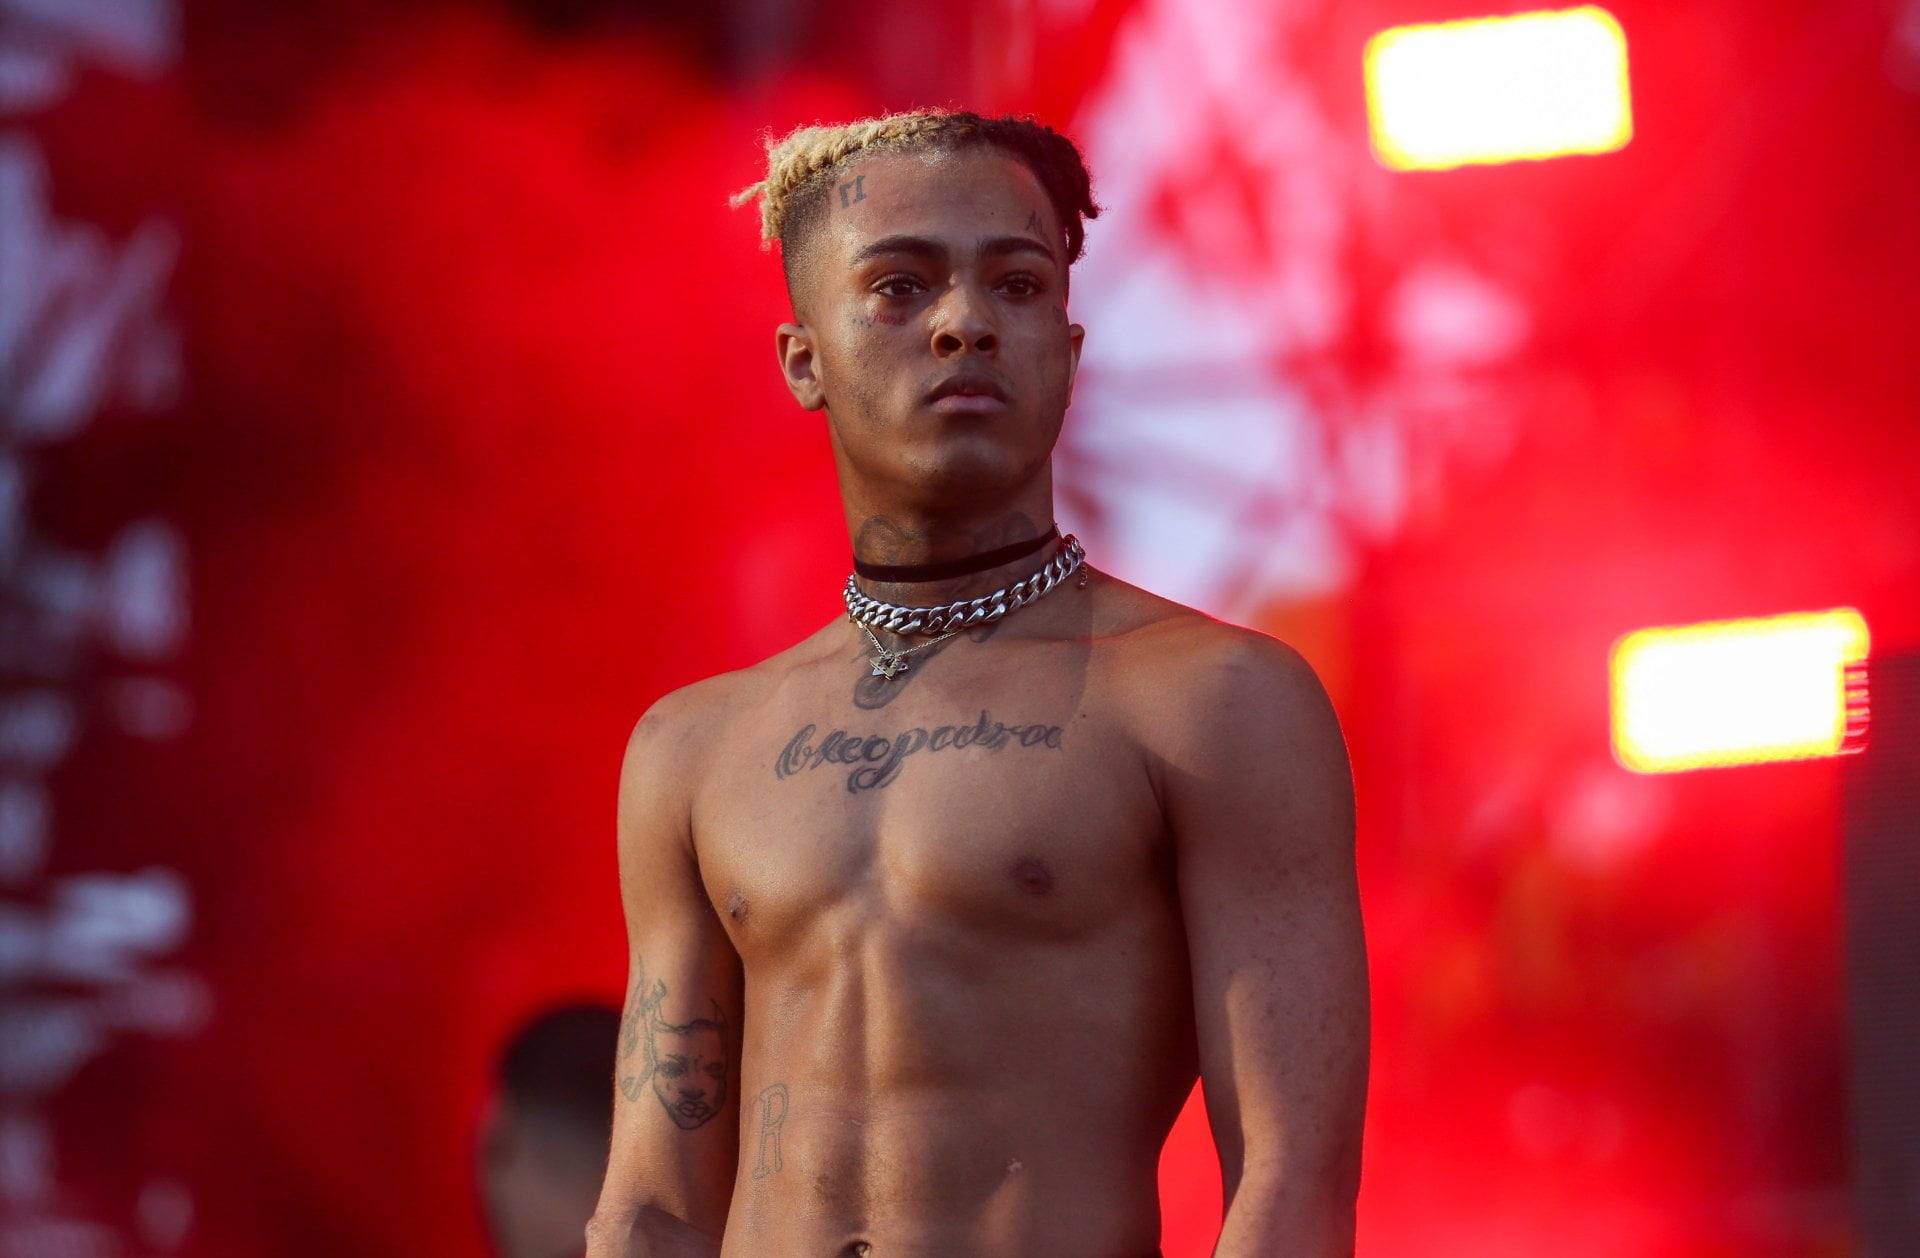 Singers, XXXTentacion, shirtless, one person, young adult, strength